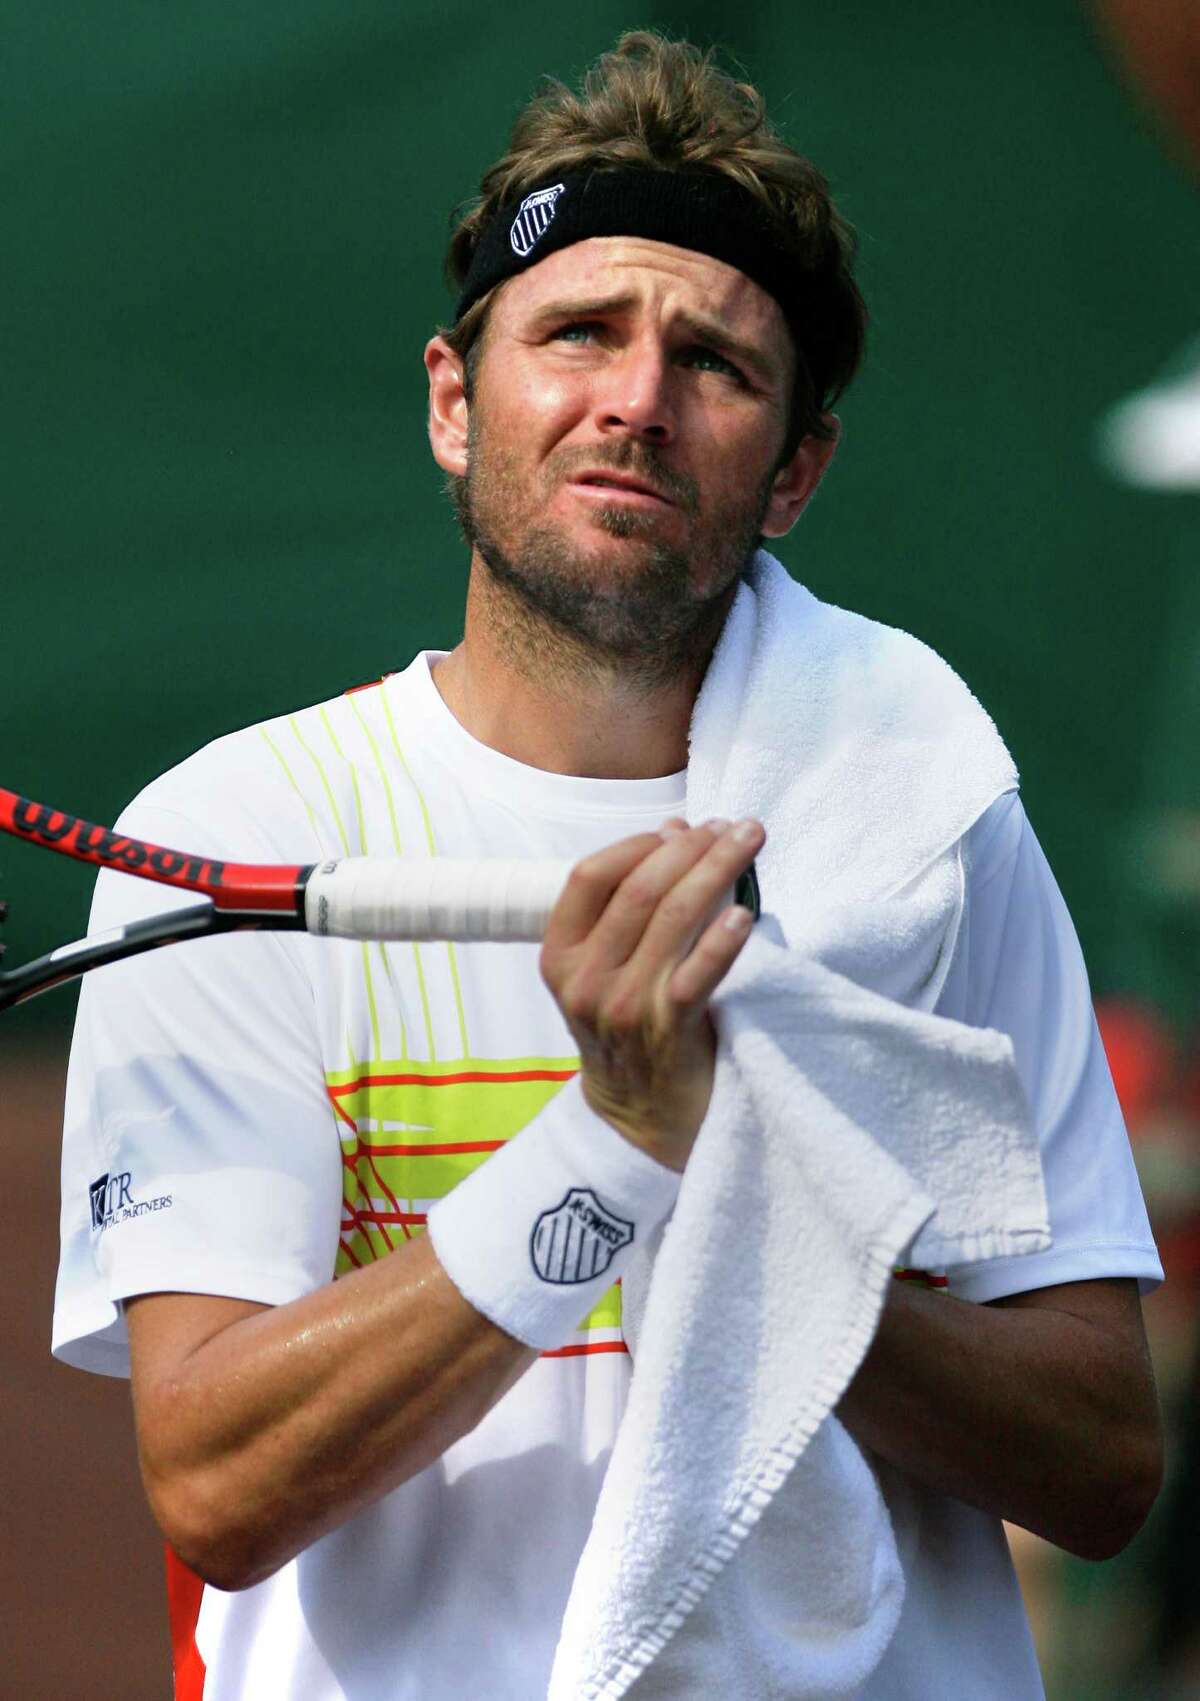 Mardy Fish reacts during a tennis match against Michael Russell during the US Men's Clay Court Championship at River Oaks Country Club Thursday, April 12, 2012, in Houston. Russell won 6-3, 6-1. (Cody Duty / Houston Chronicle)